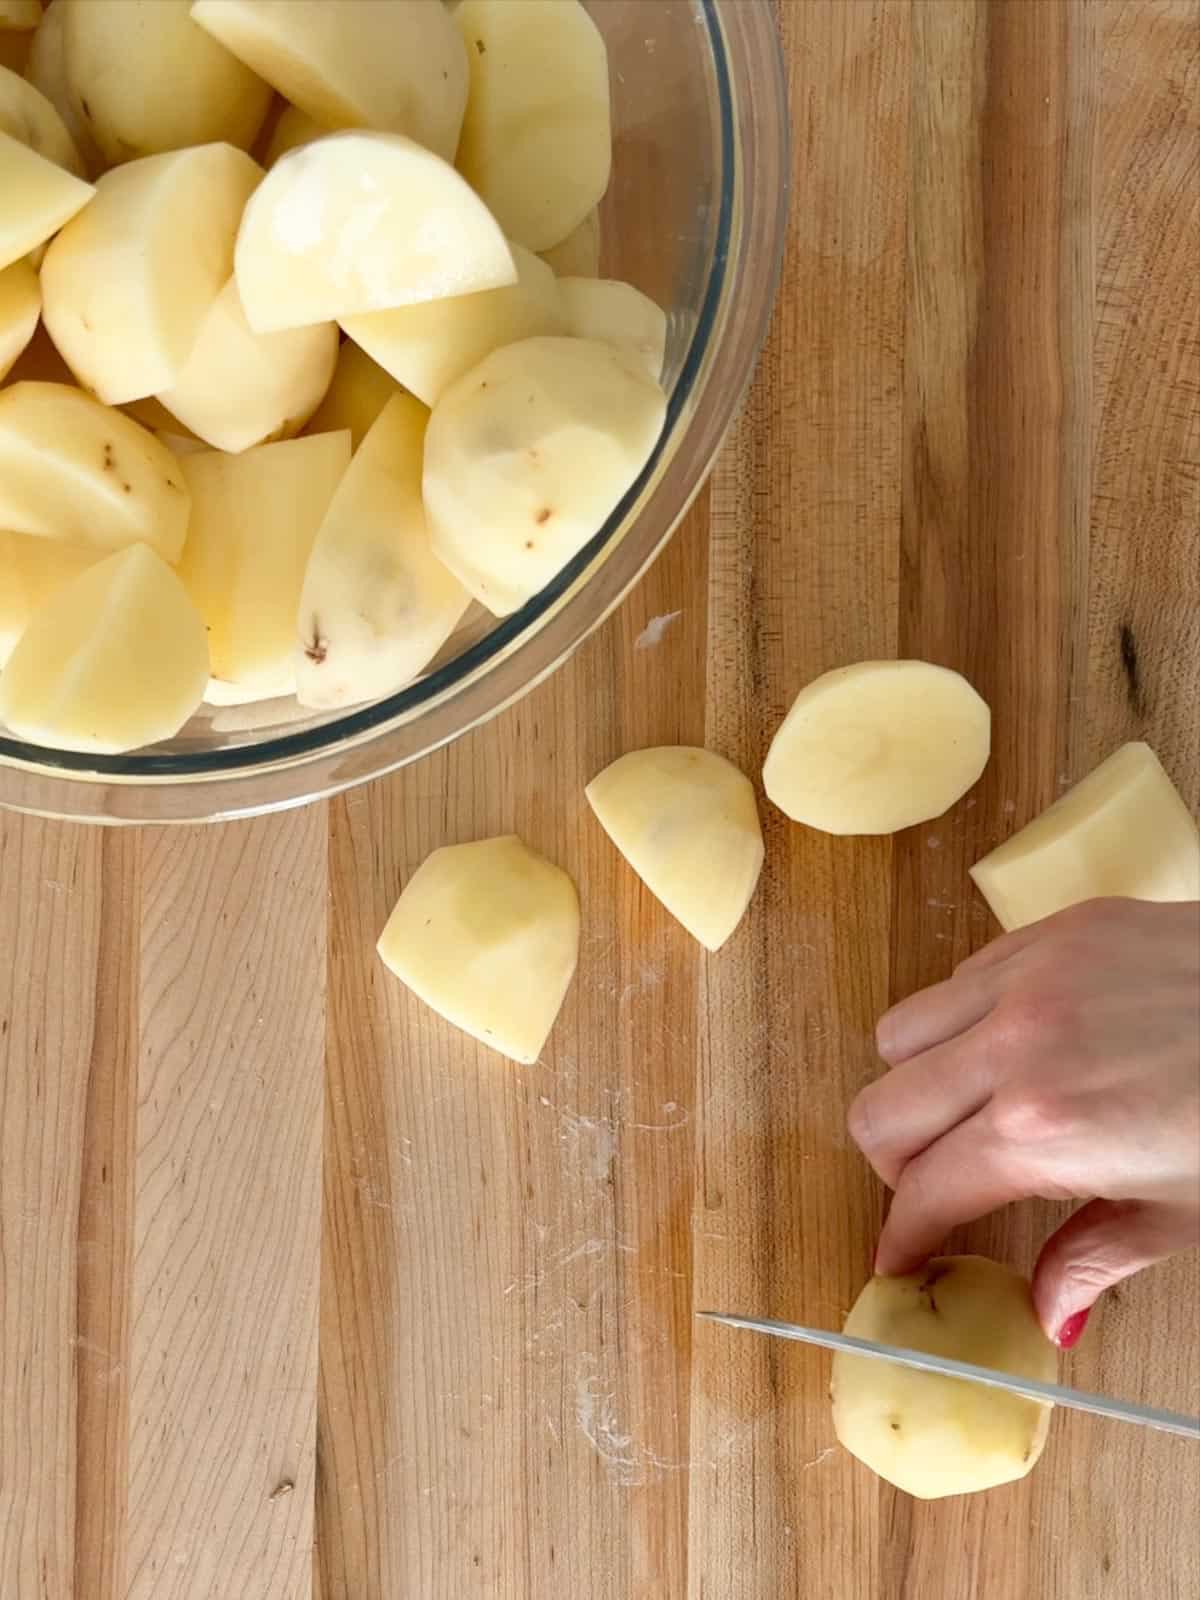 Peeled potatoes are chopped into even pieces.